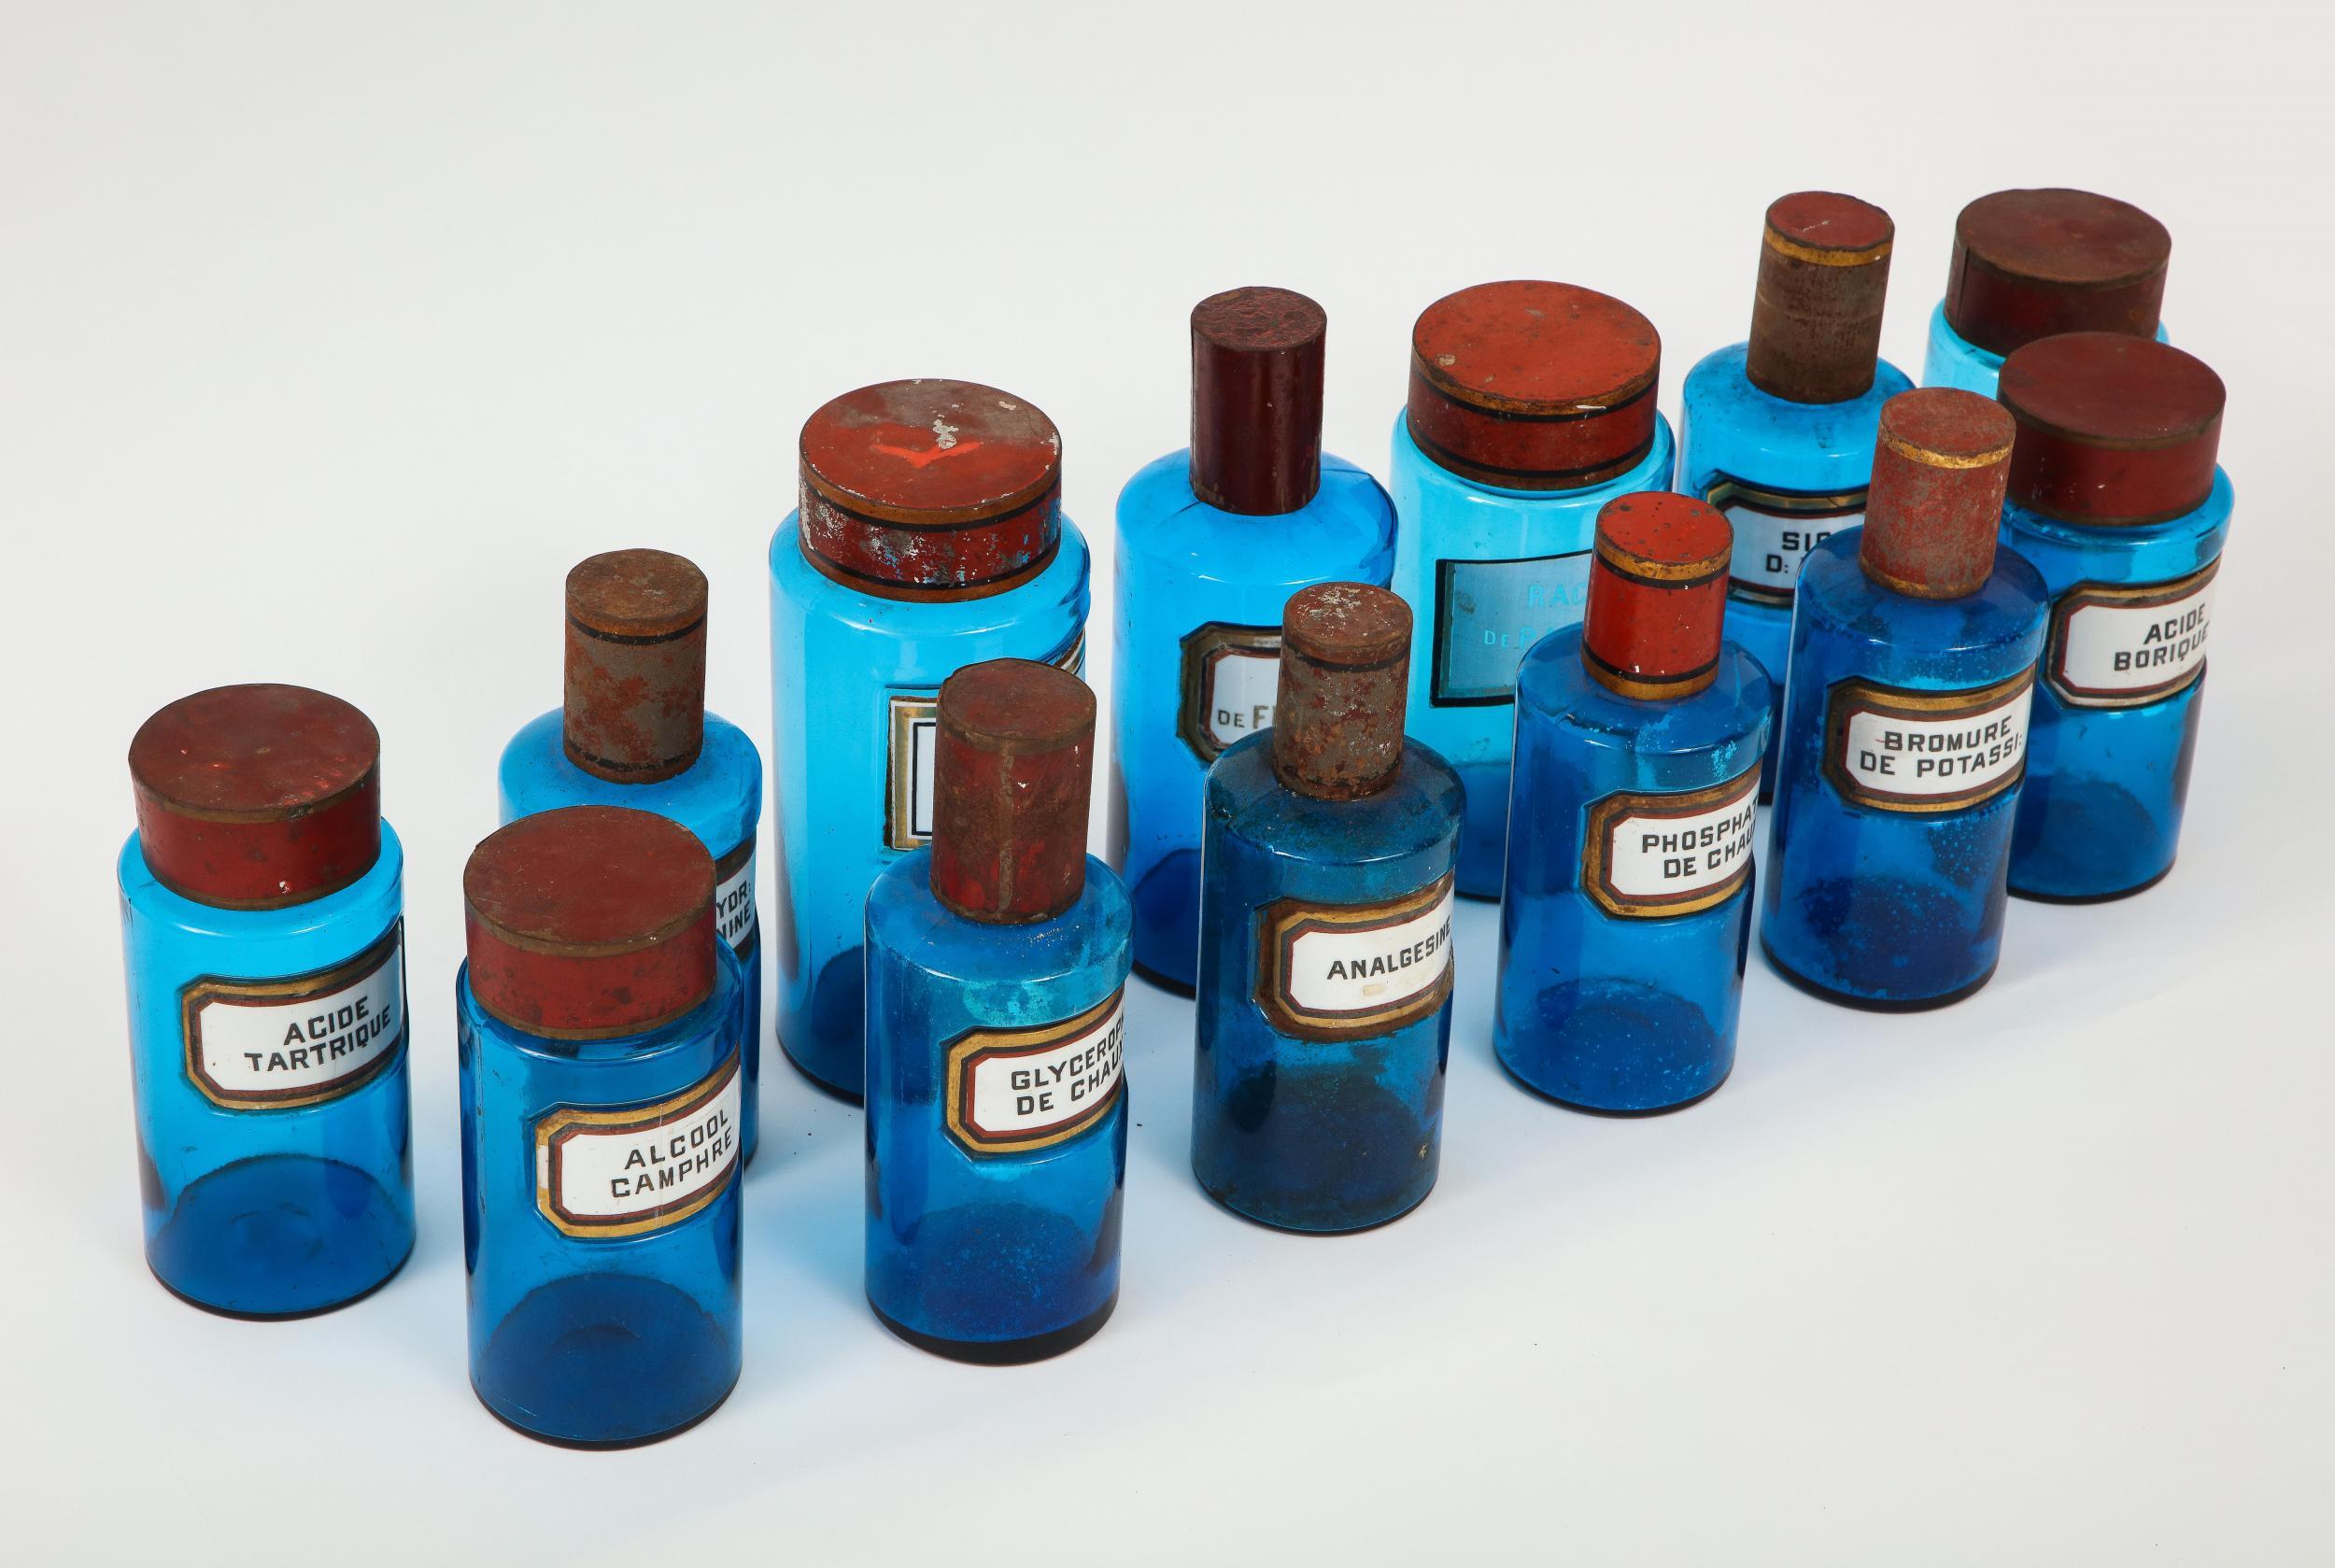 A stunning set of fourteen French apothecary or pharmacy jars. A clear and vibrant blue glass with white enameled labels and red metal caps. Bottle labels include linseed, boric acid, and lime phosphate. A great way to add color to bookshelves or